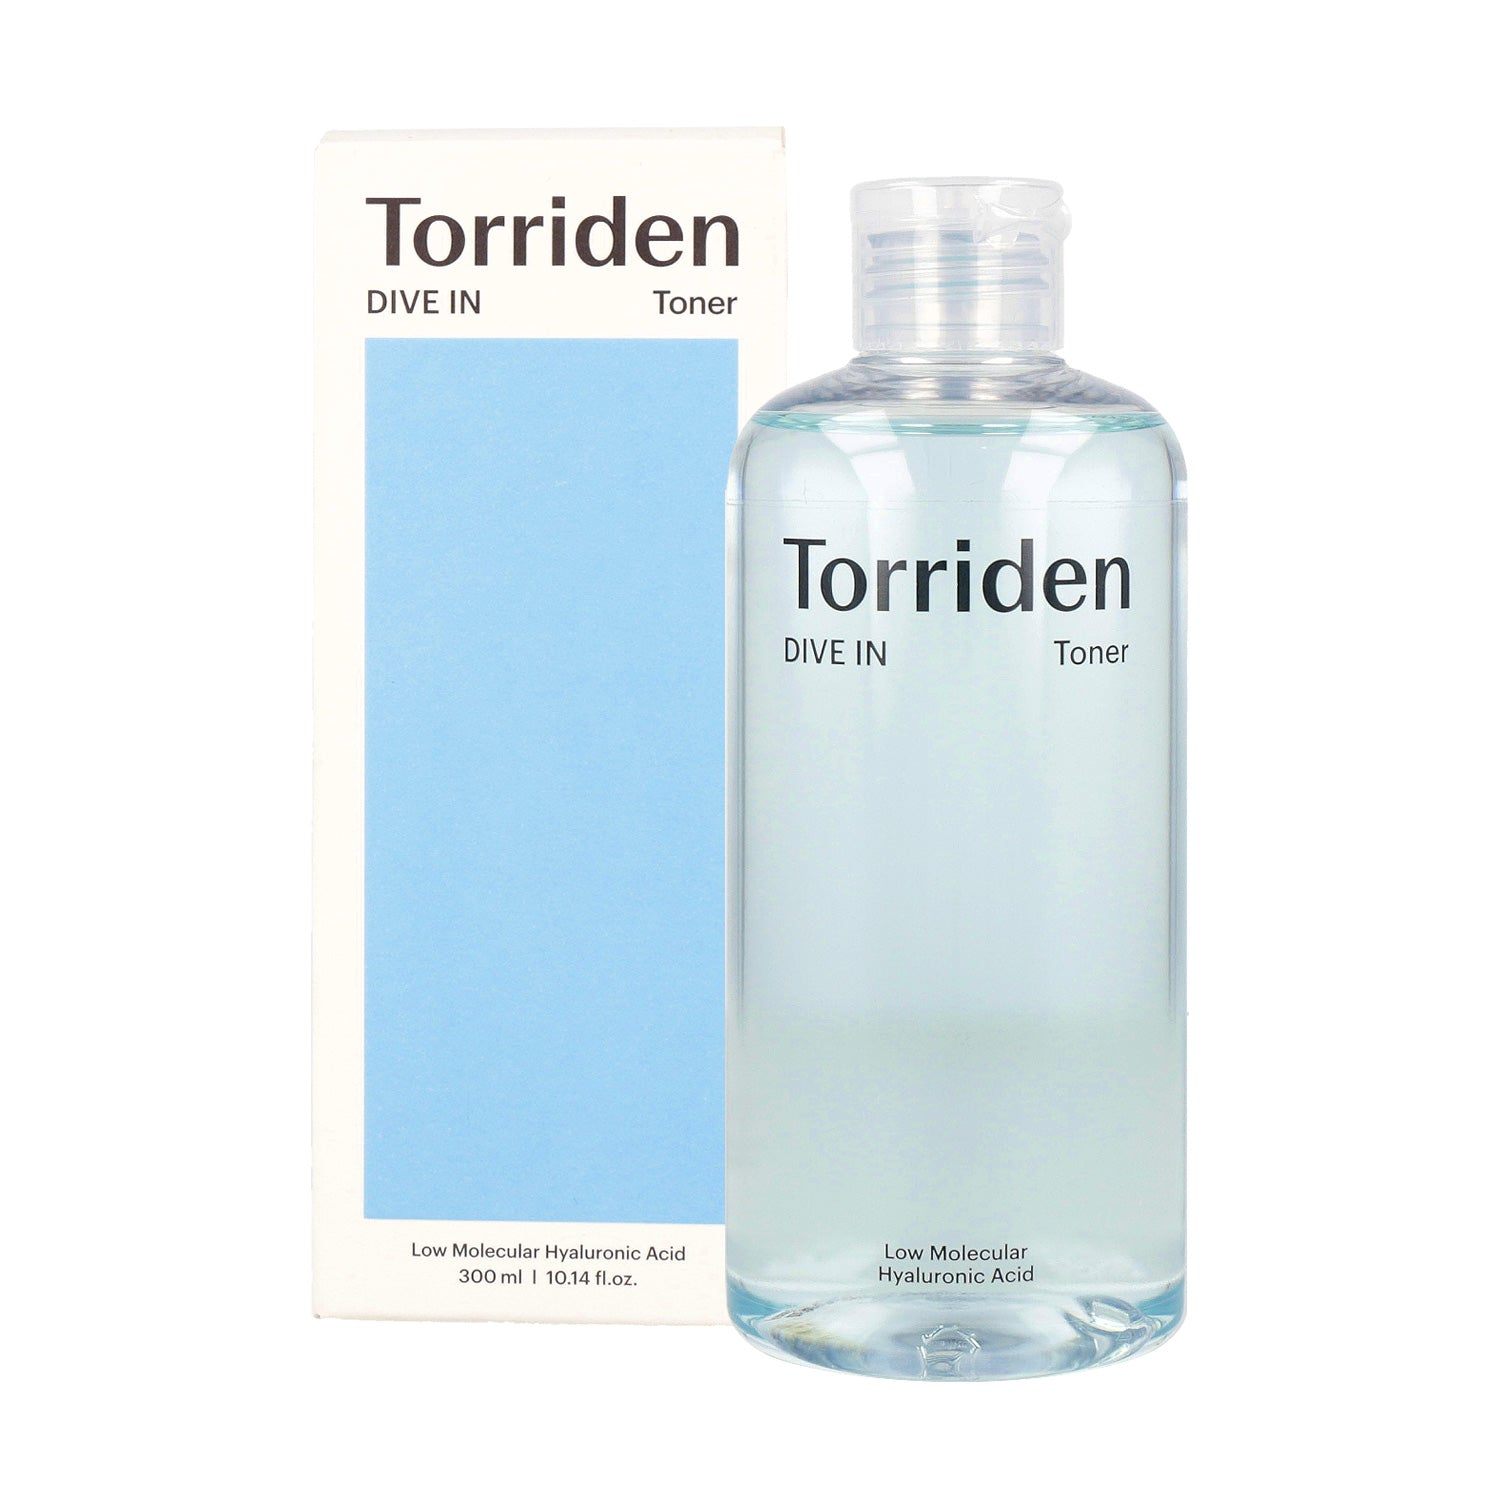 The Torriden Dive-In Low Molecule Hyaluronic Acid Toner (300ml) is designed to provide deep hydration and improve skin moisture levels. 